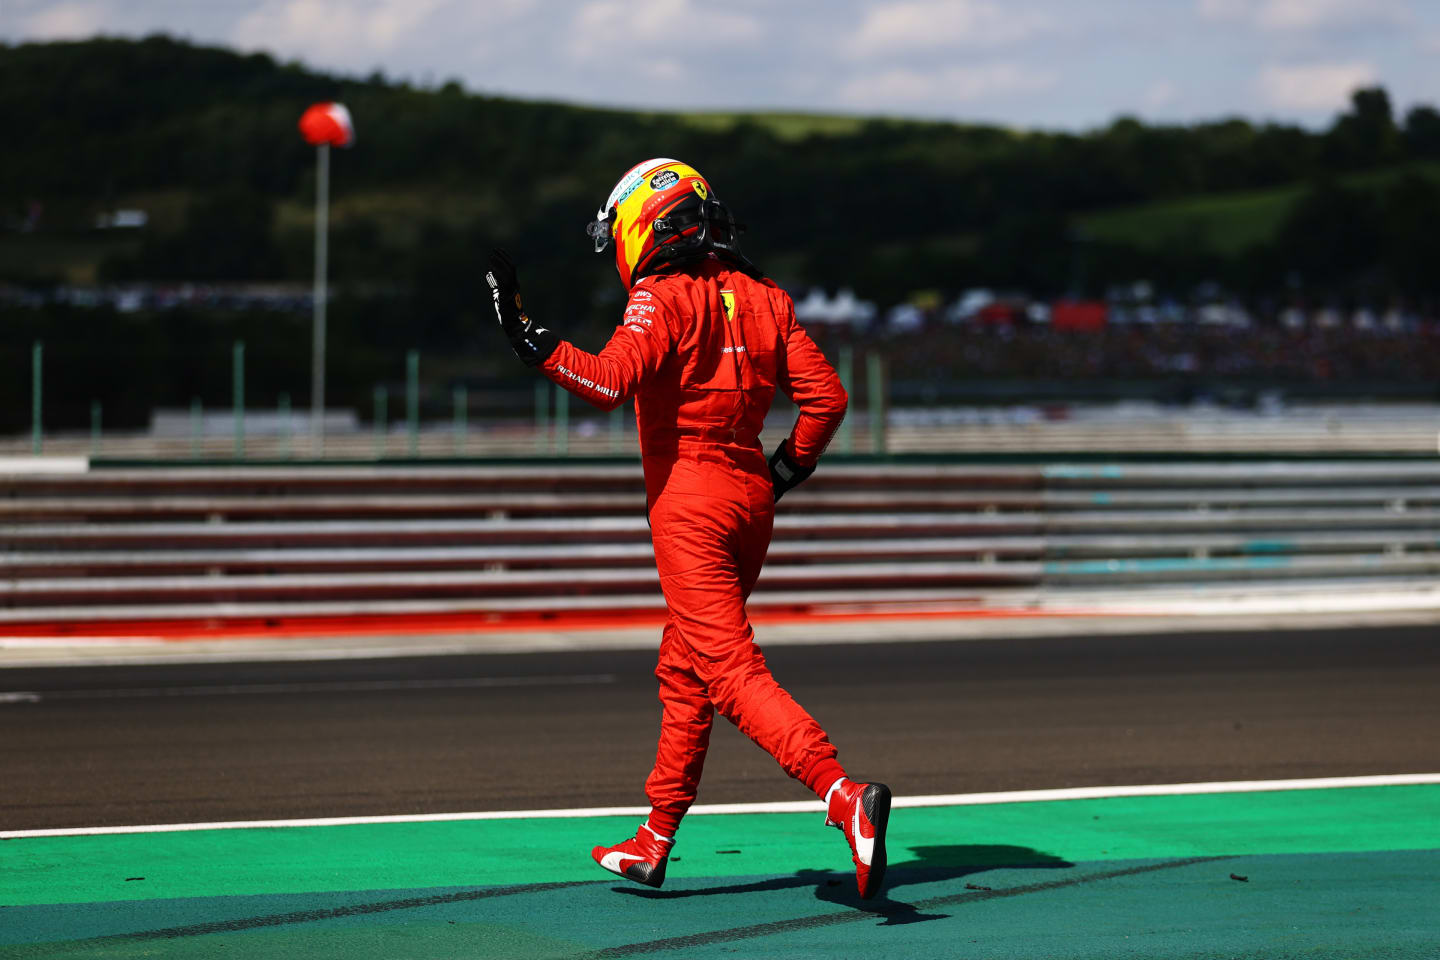 BUDAPEST, HUNGARY - JULY 31: Carlos Sainz of Spain driving the (55) Scuderia Ferrari SF21 walks from his car after a crash during qualifying ahead of the F1 Grand Prix of Hungary at Hungaroring on July 31, 2021 in Budapest, Hungary. (Photo by Bryn Lennon/Getty Images)